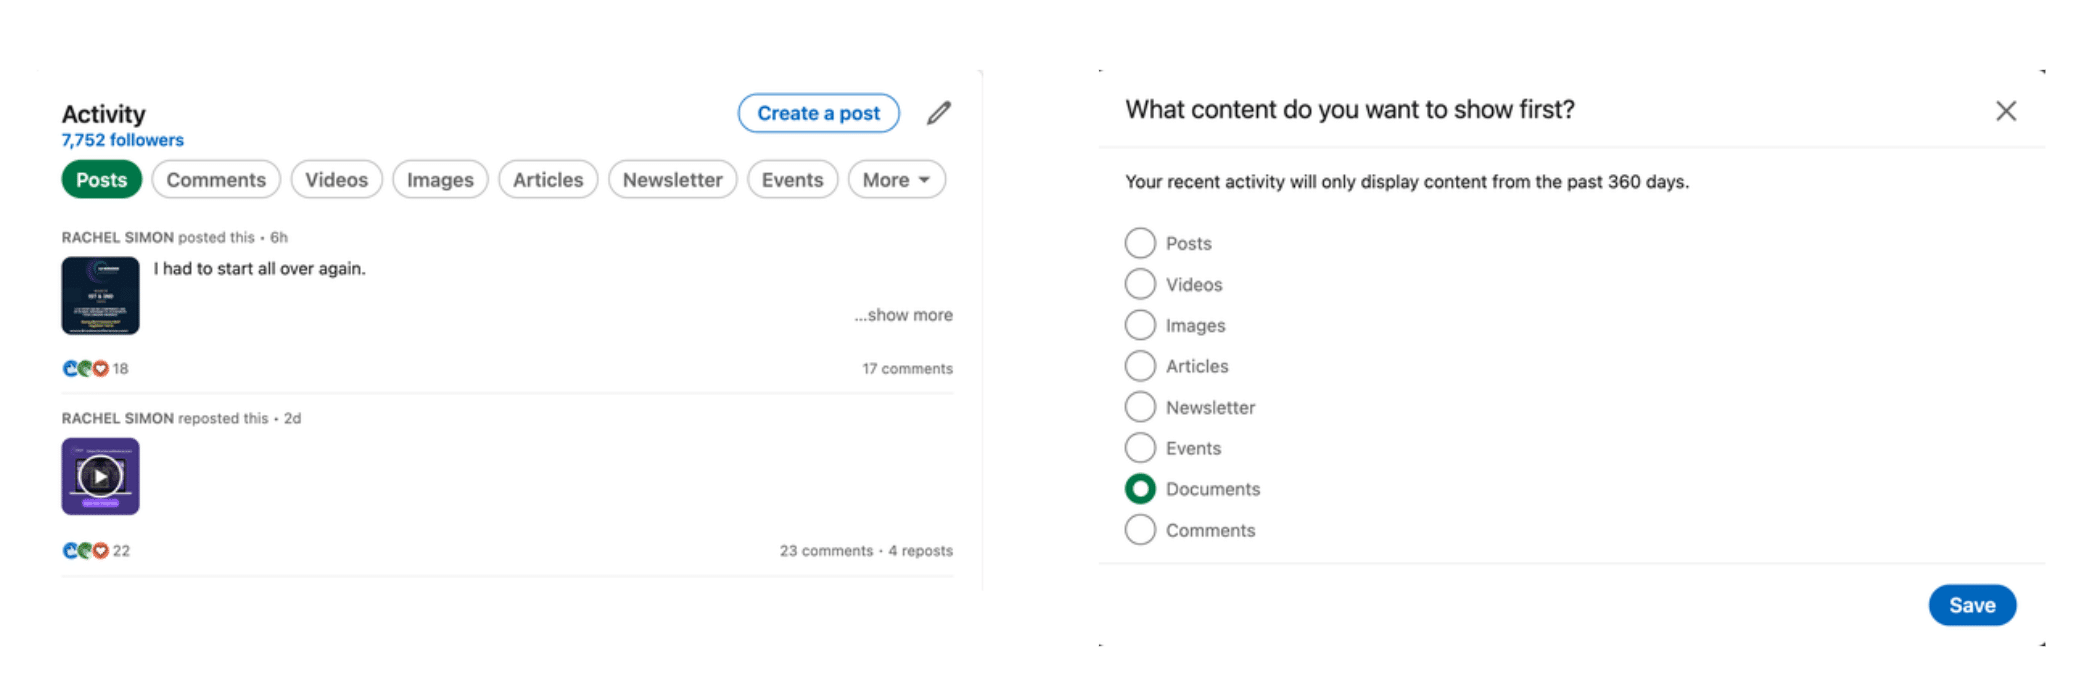 This is a screenshot from LinkedIn that shows how to select which content type to highlight.